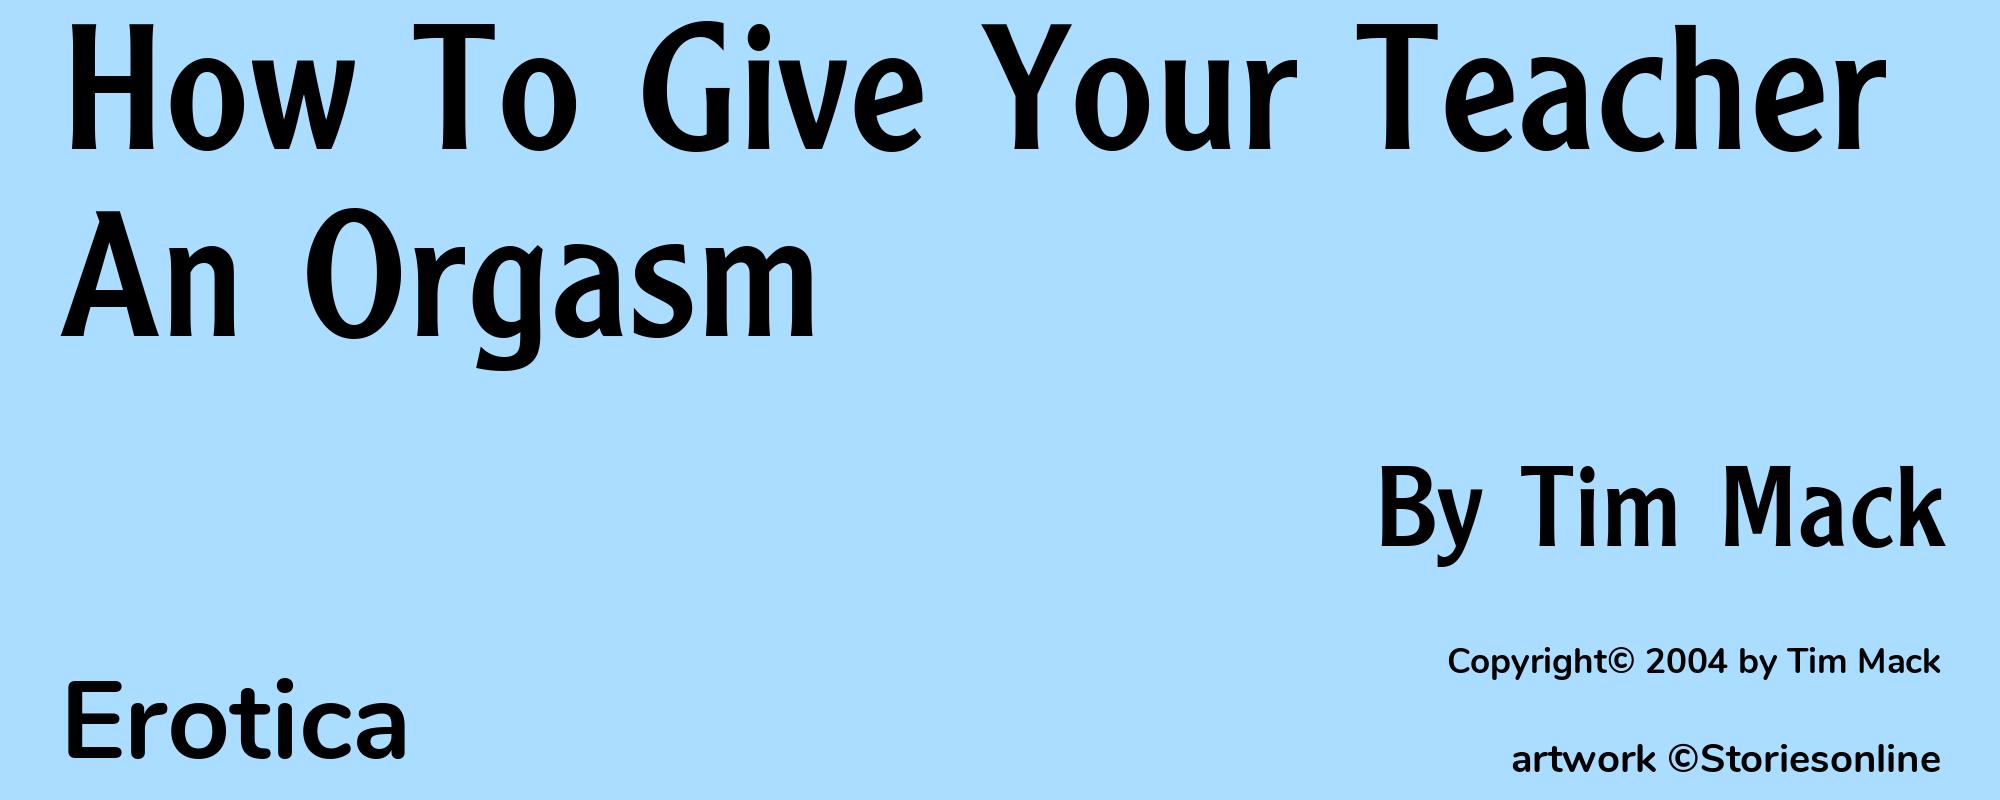 How To Give Your Teacher An Orgasm - Cover